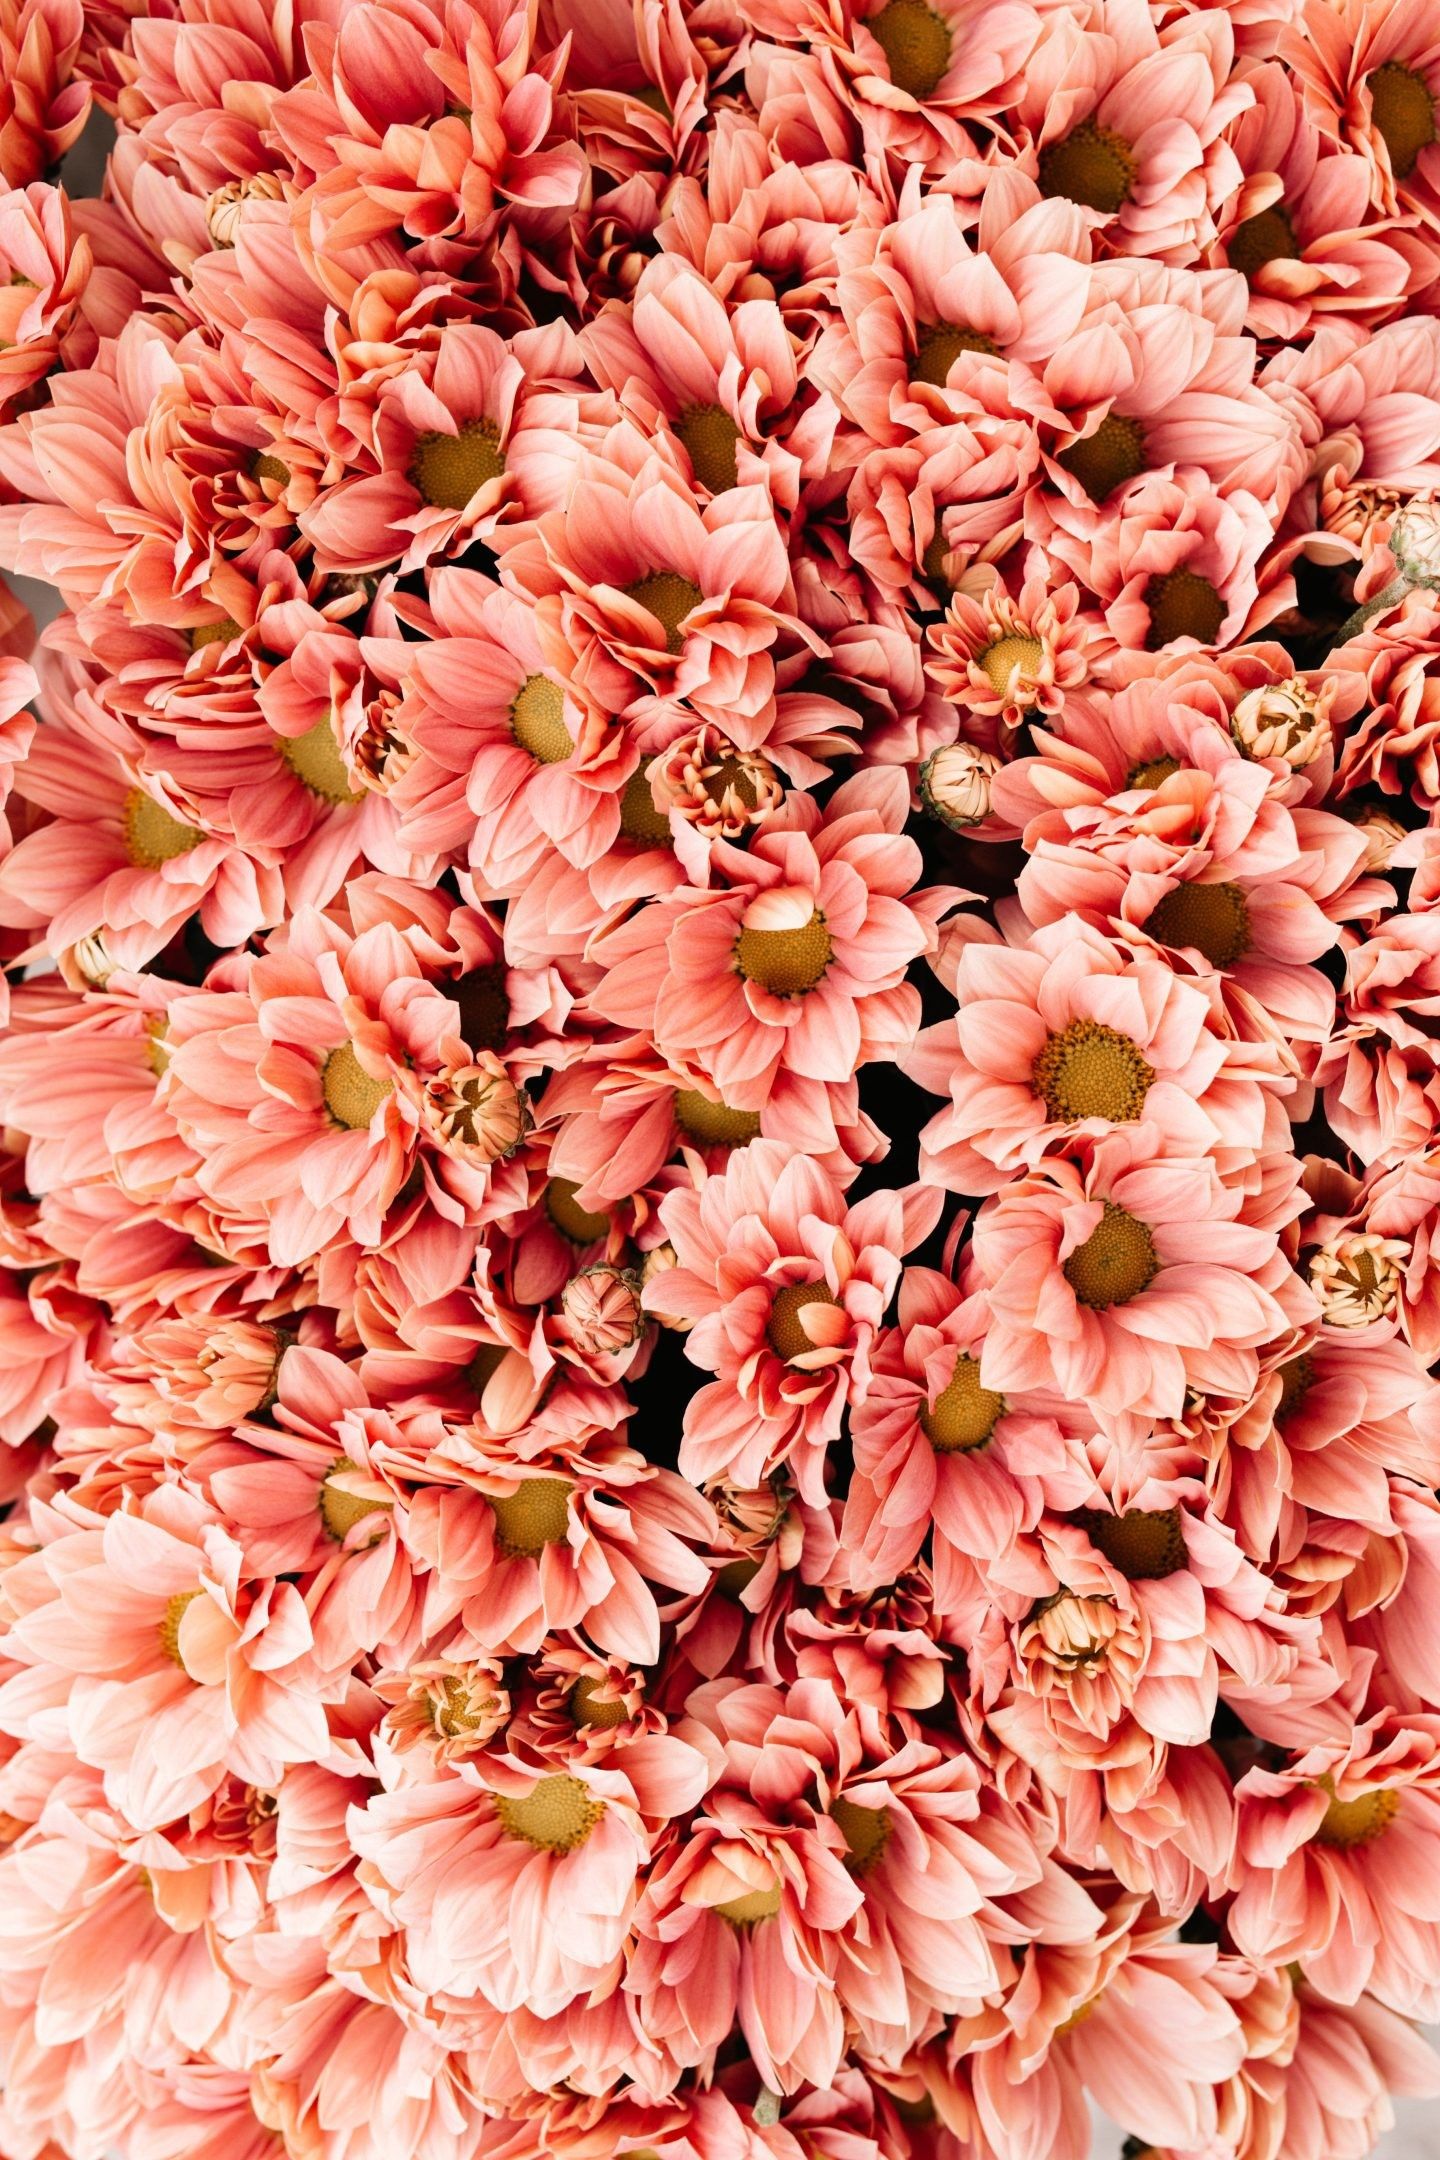 A close up of some pink flowers - Flower